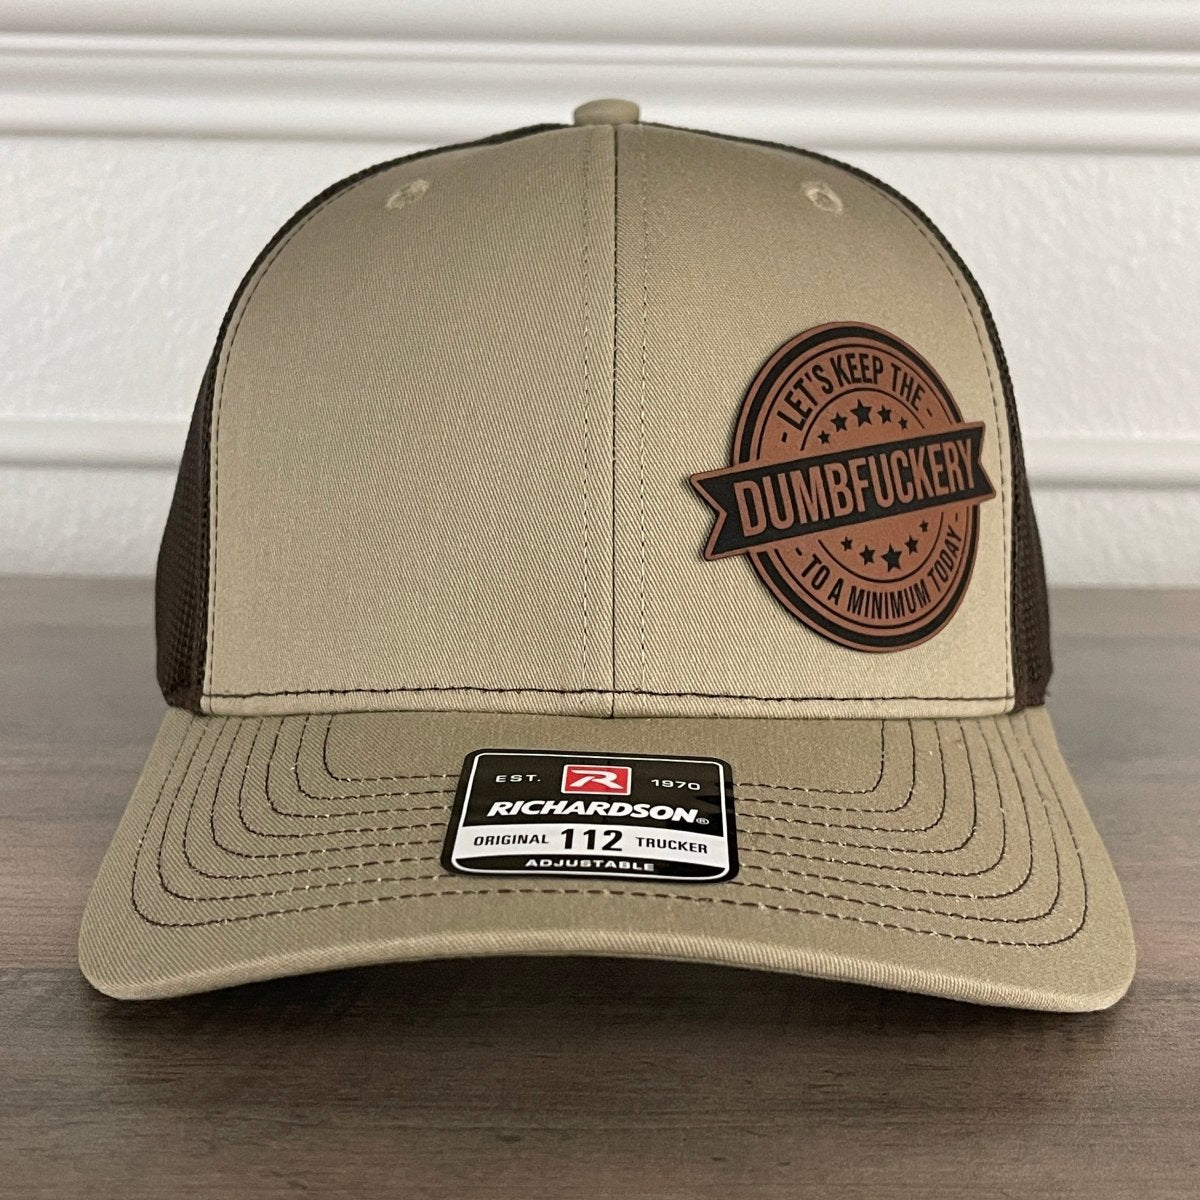 Let's Keep The Dumbfckery To A Minimum Today Funny Leather Patch Hat Khaki/Brown Patch Hat - VividEditions